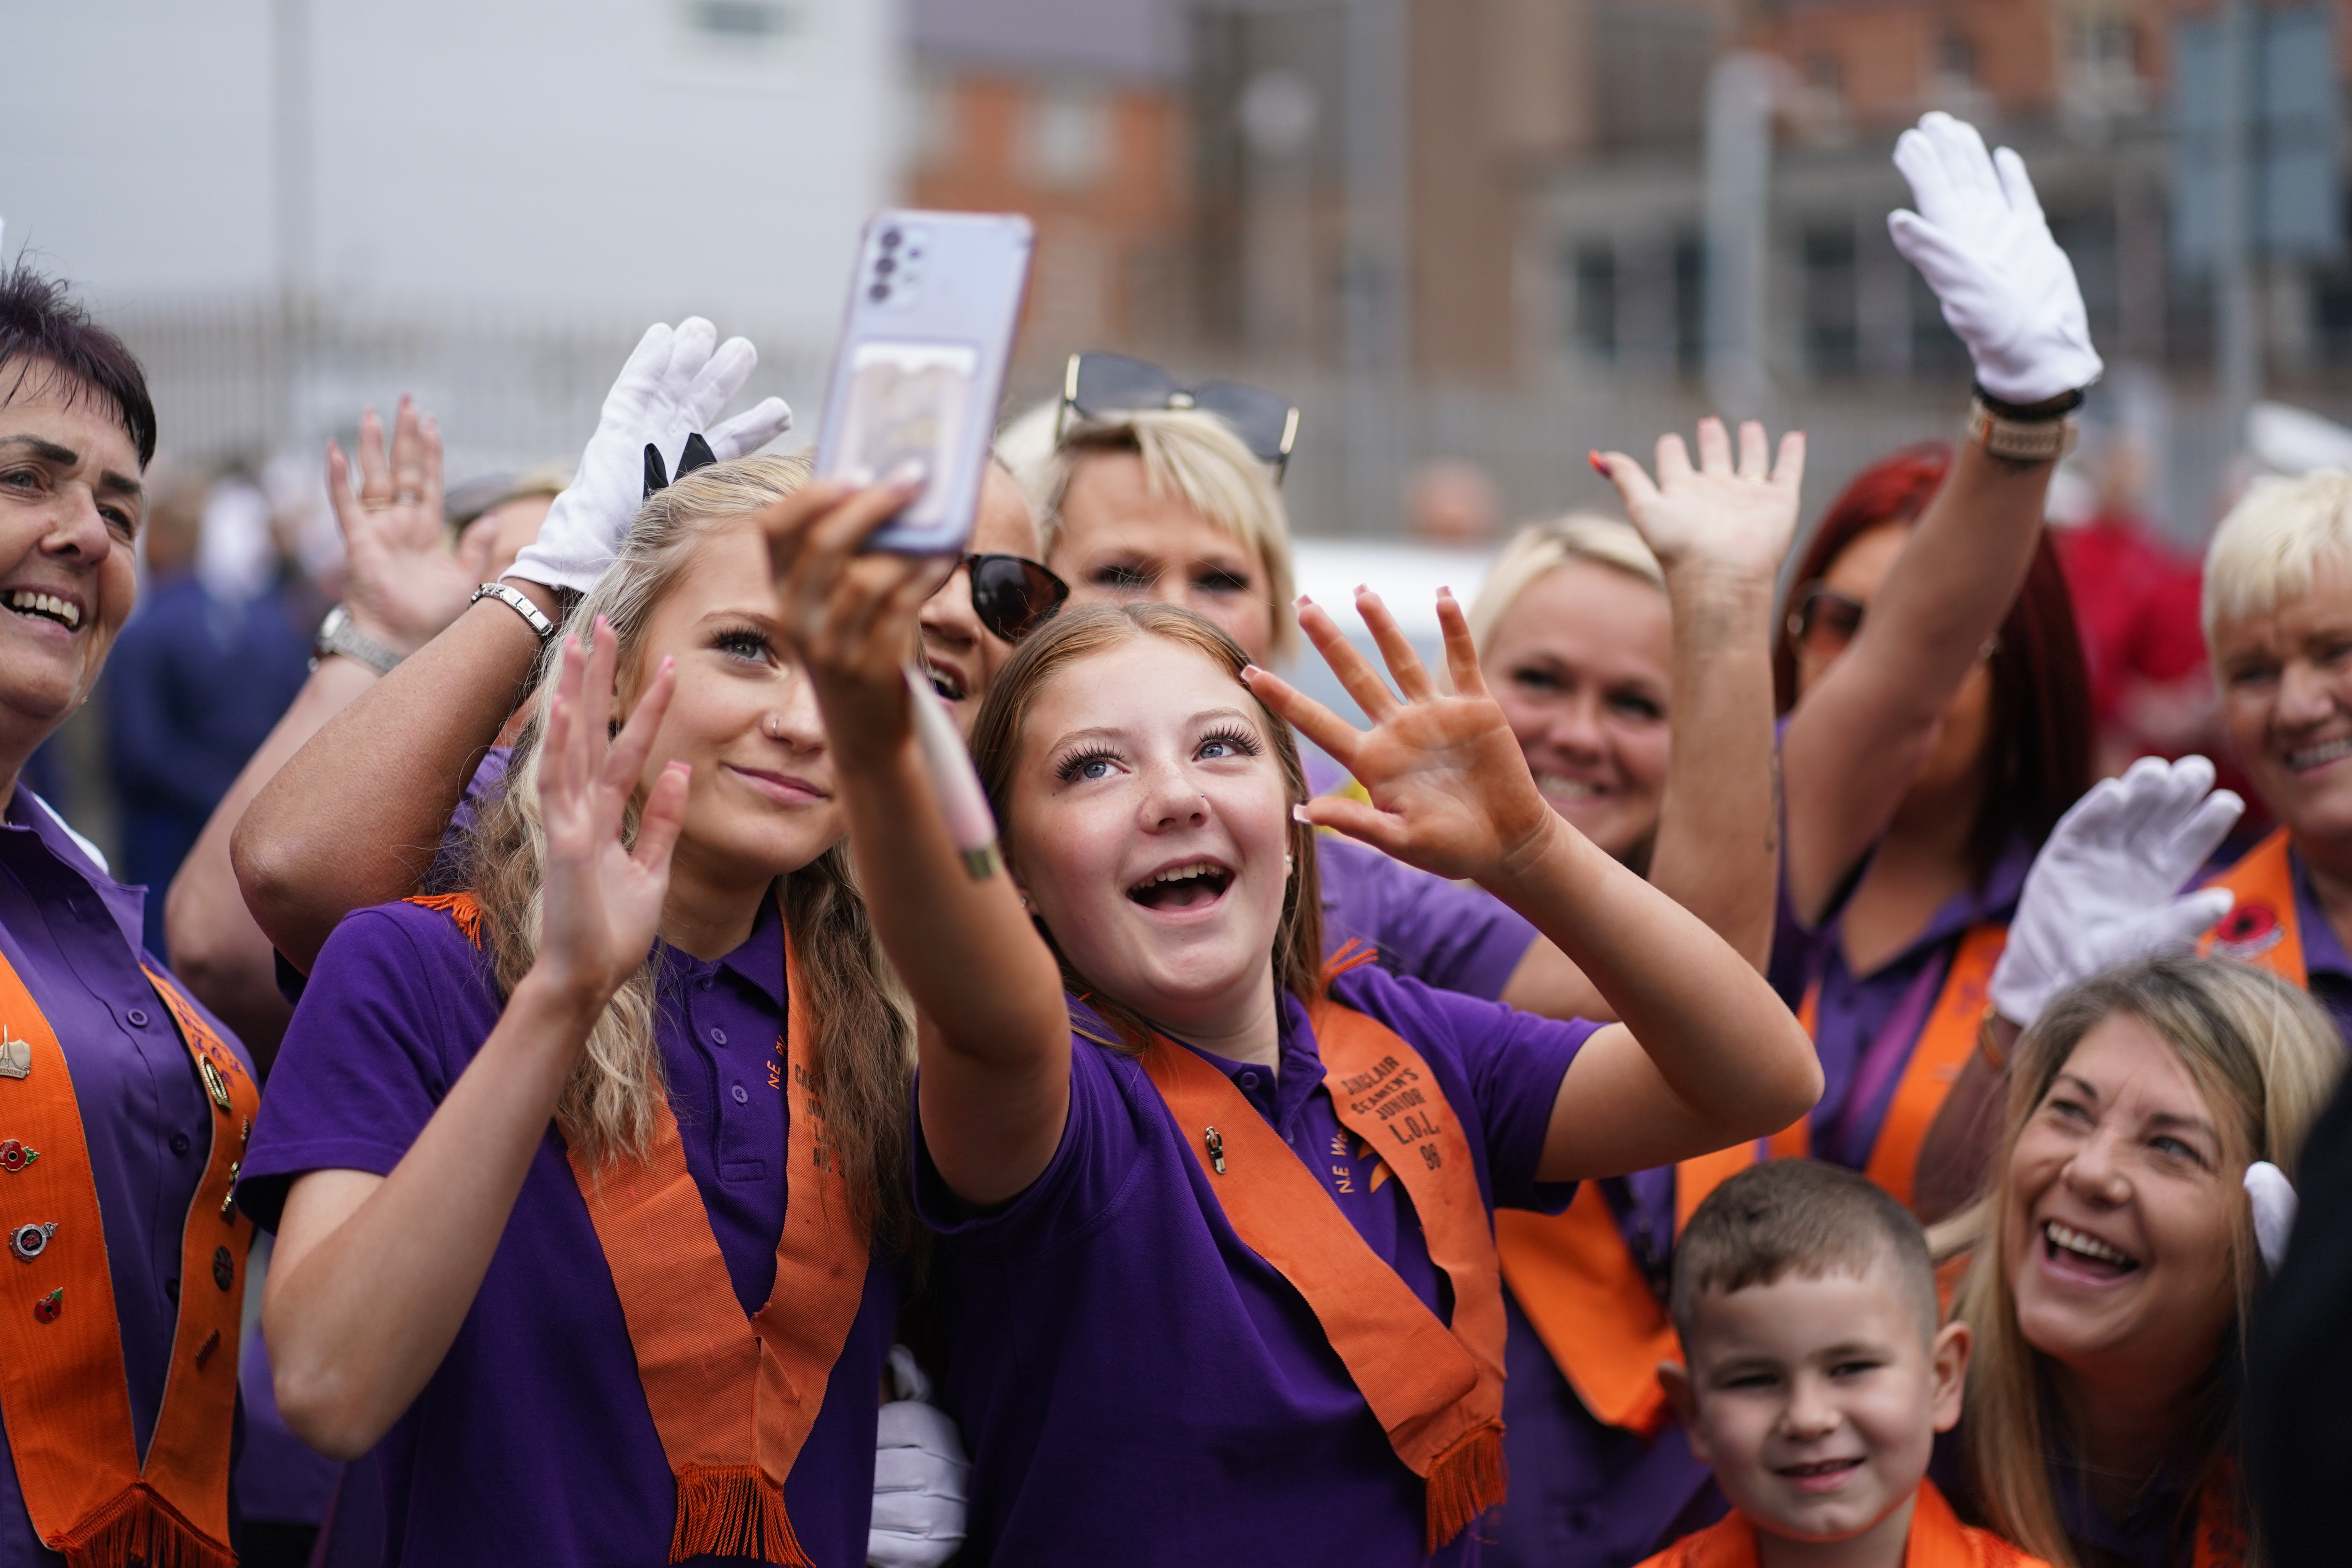 People gather at Carlisle Circus in Belfast ahead of an Orange Order parade (Brian Lawless/PA)